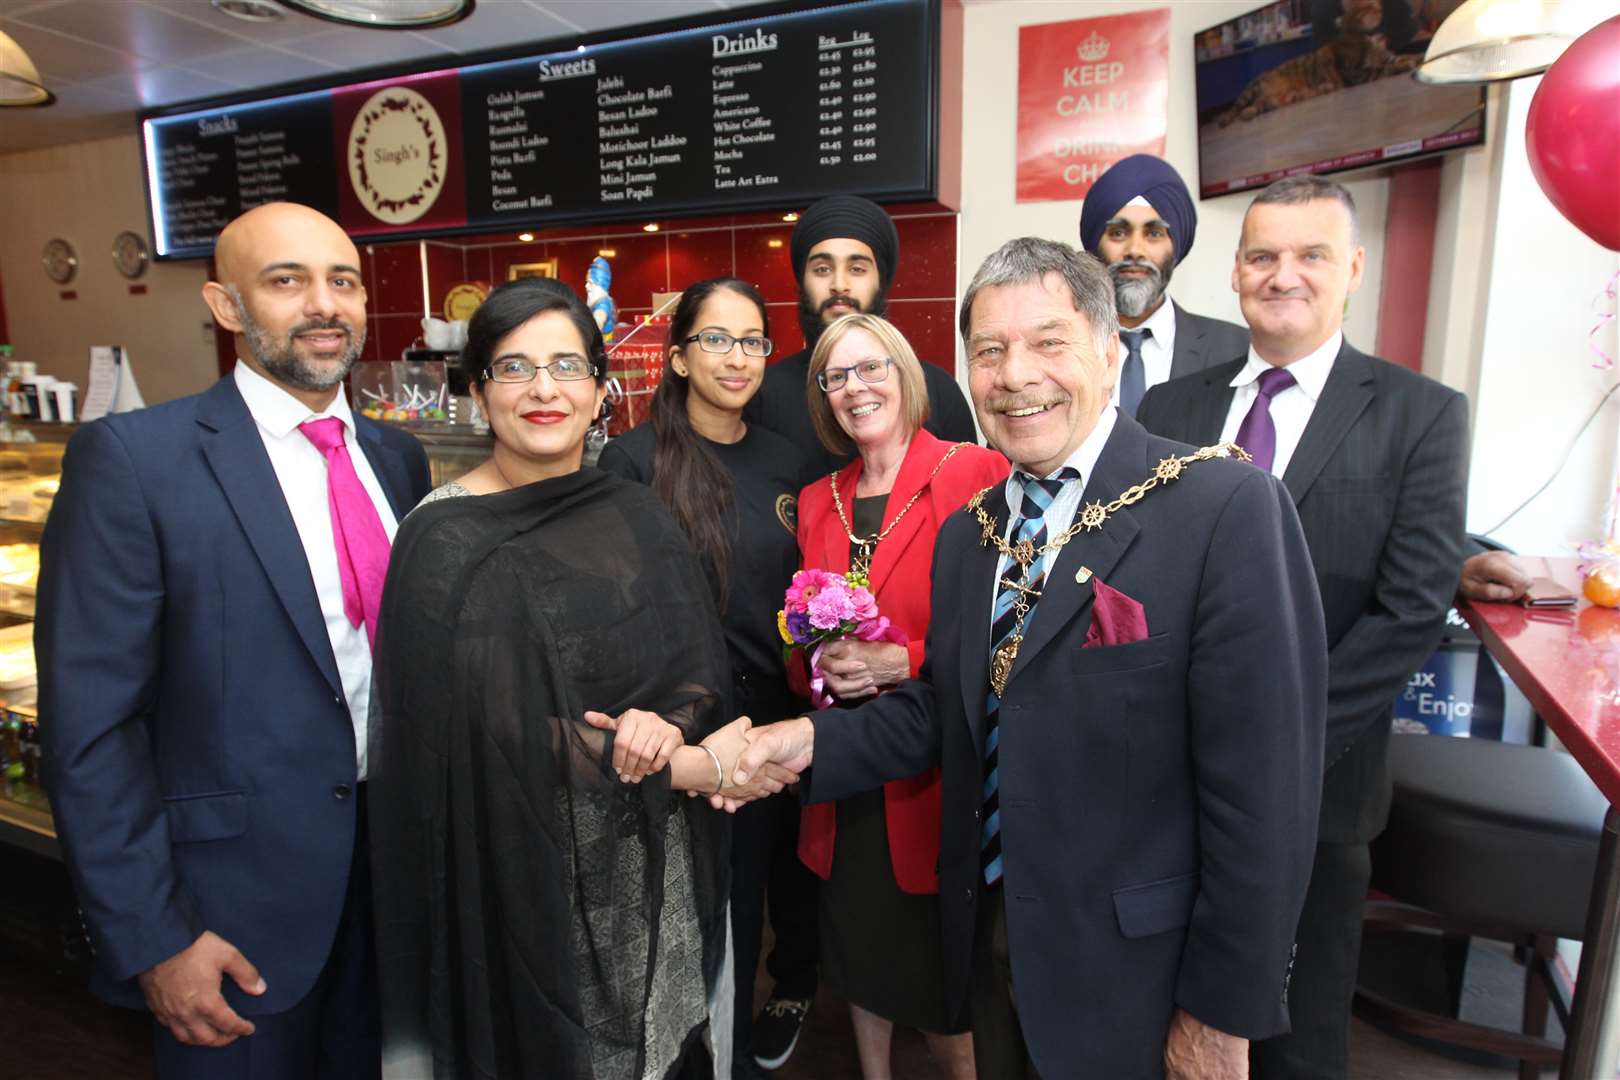 The Mayor of Gravesham Cllr Mick Wenban and Mayoress Fiona Strike JP, greet Singh's co-owner Jaspreet Lalli flanked by Natwest relationship manager Rav Sall, far left, and Natwest director of business banks Alan Andrews, far right, plus family members